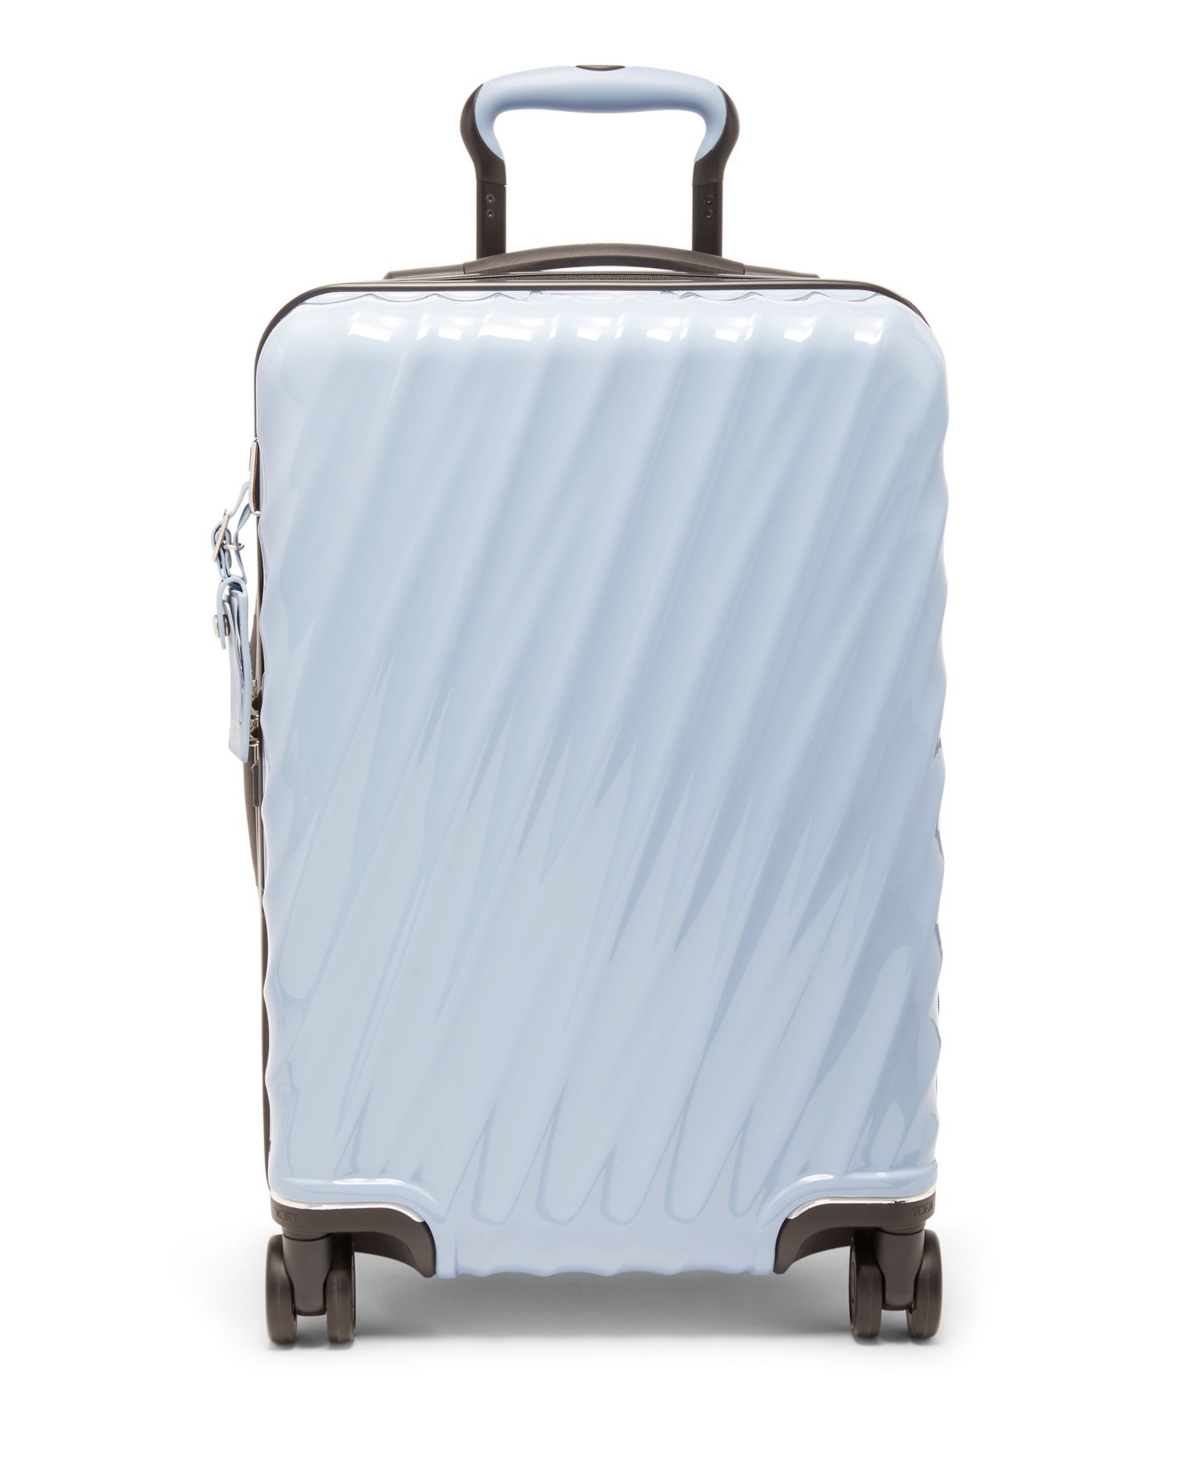 Tumi 19 Degree International Expandable 4 Wheeled Carry-on In Halogen Blue